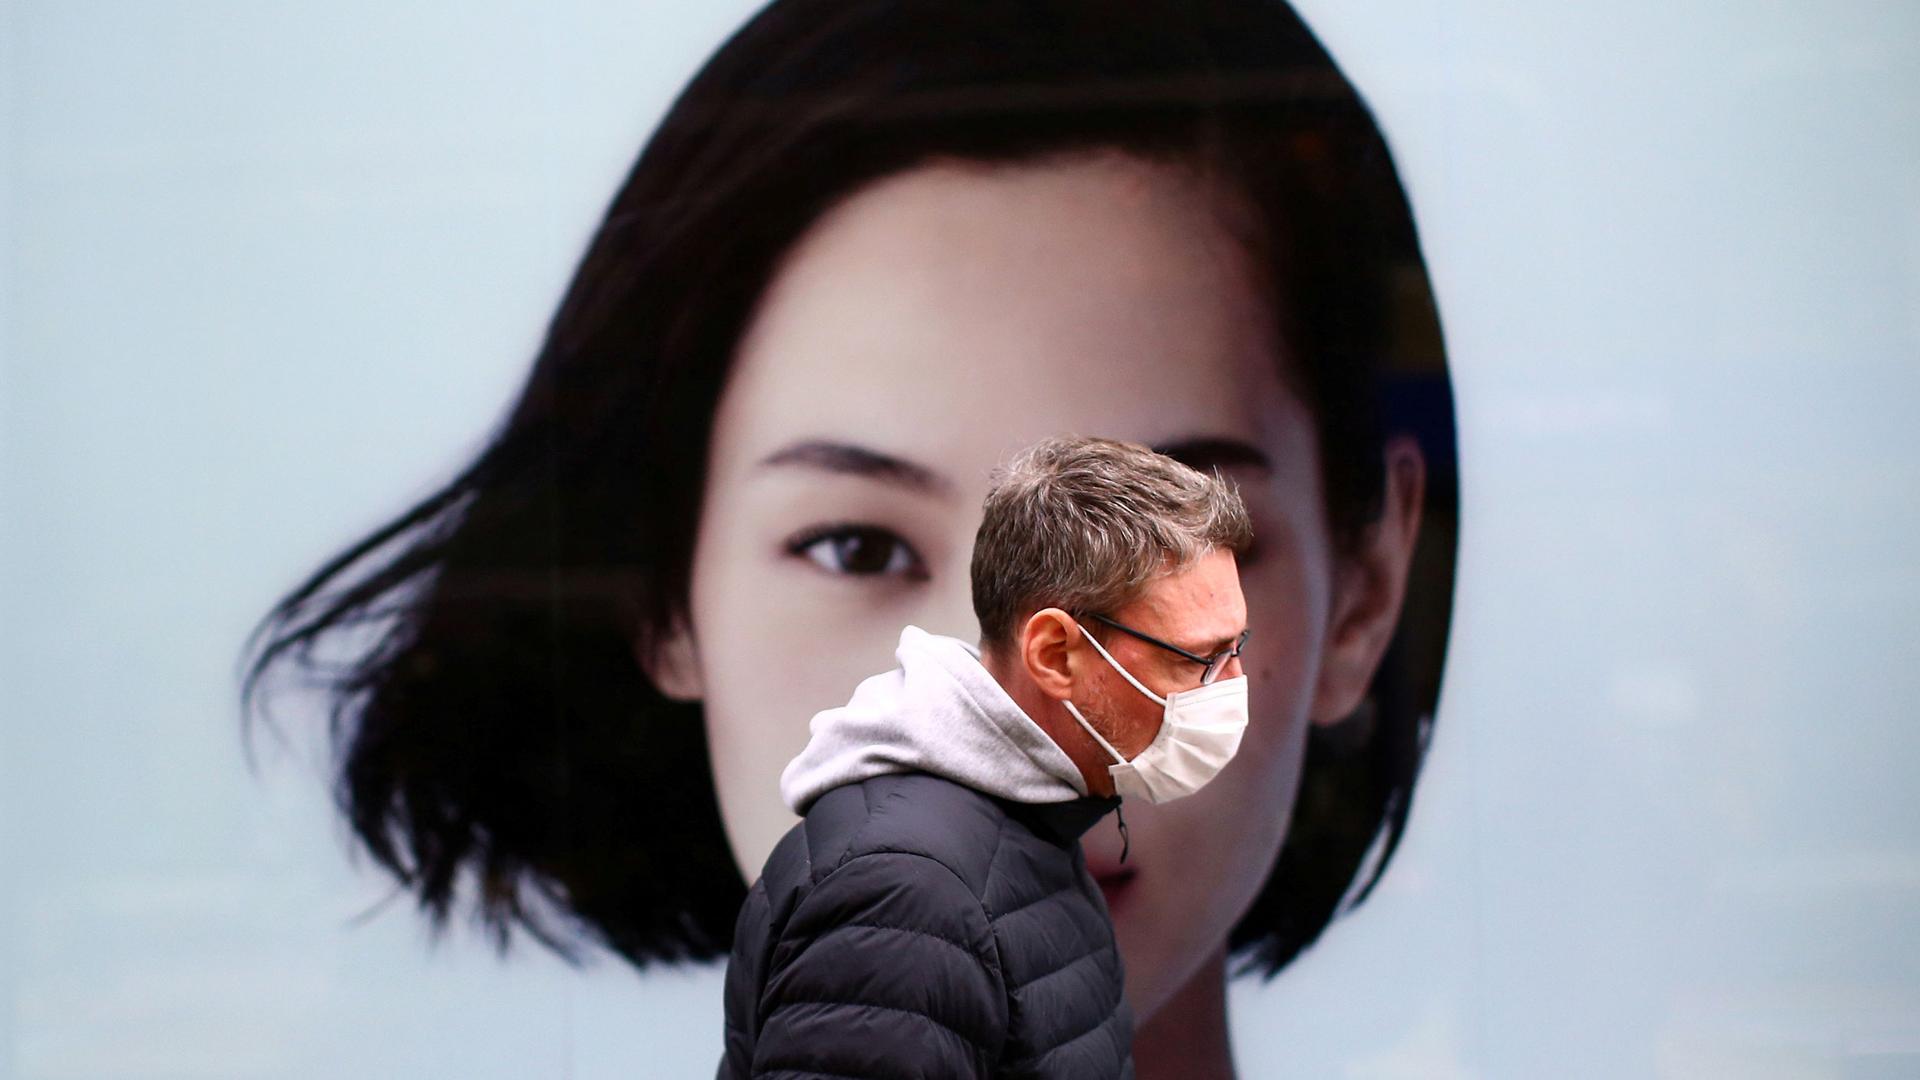 A man is shown wearing a puff jacket and face mask and walking past a advertisement with the face of a woman on it.